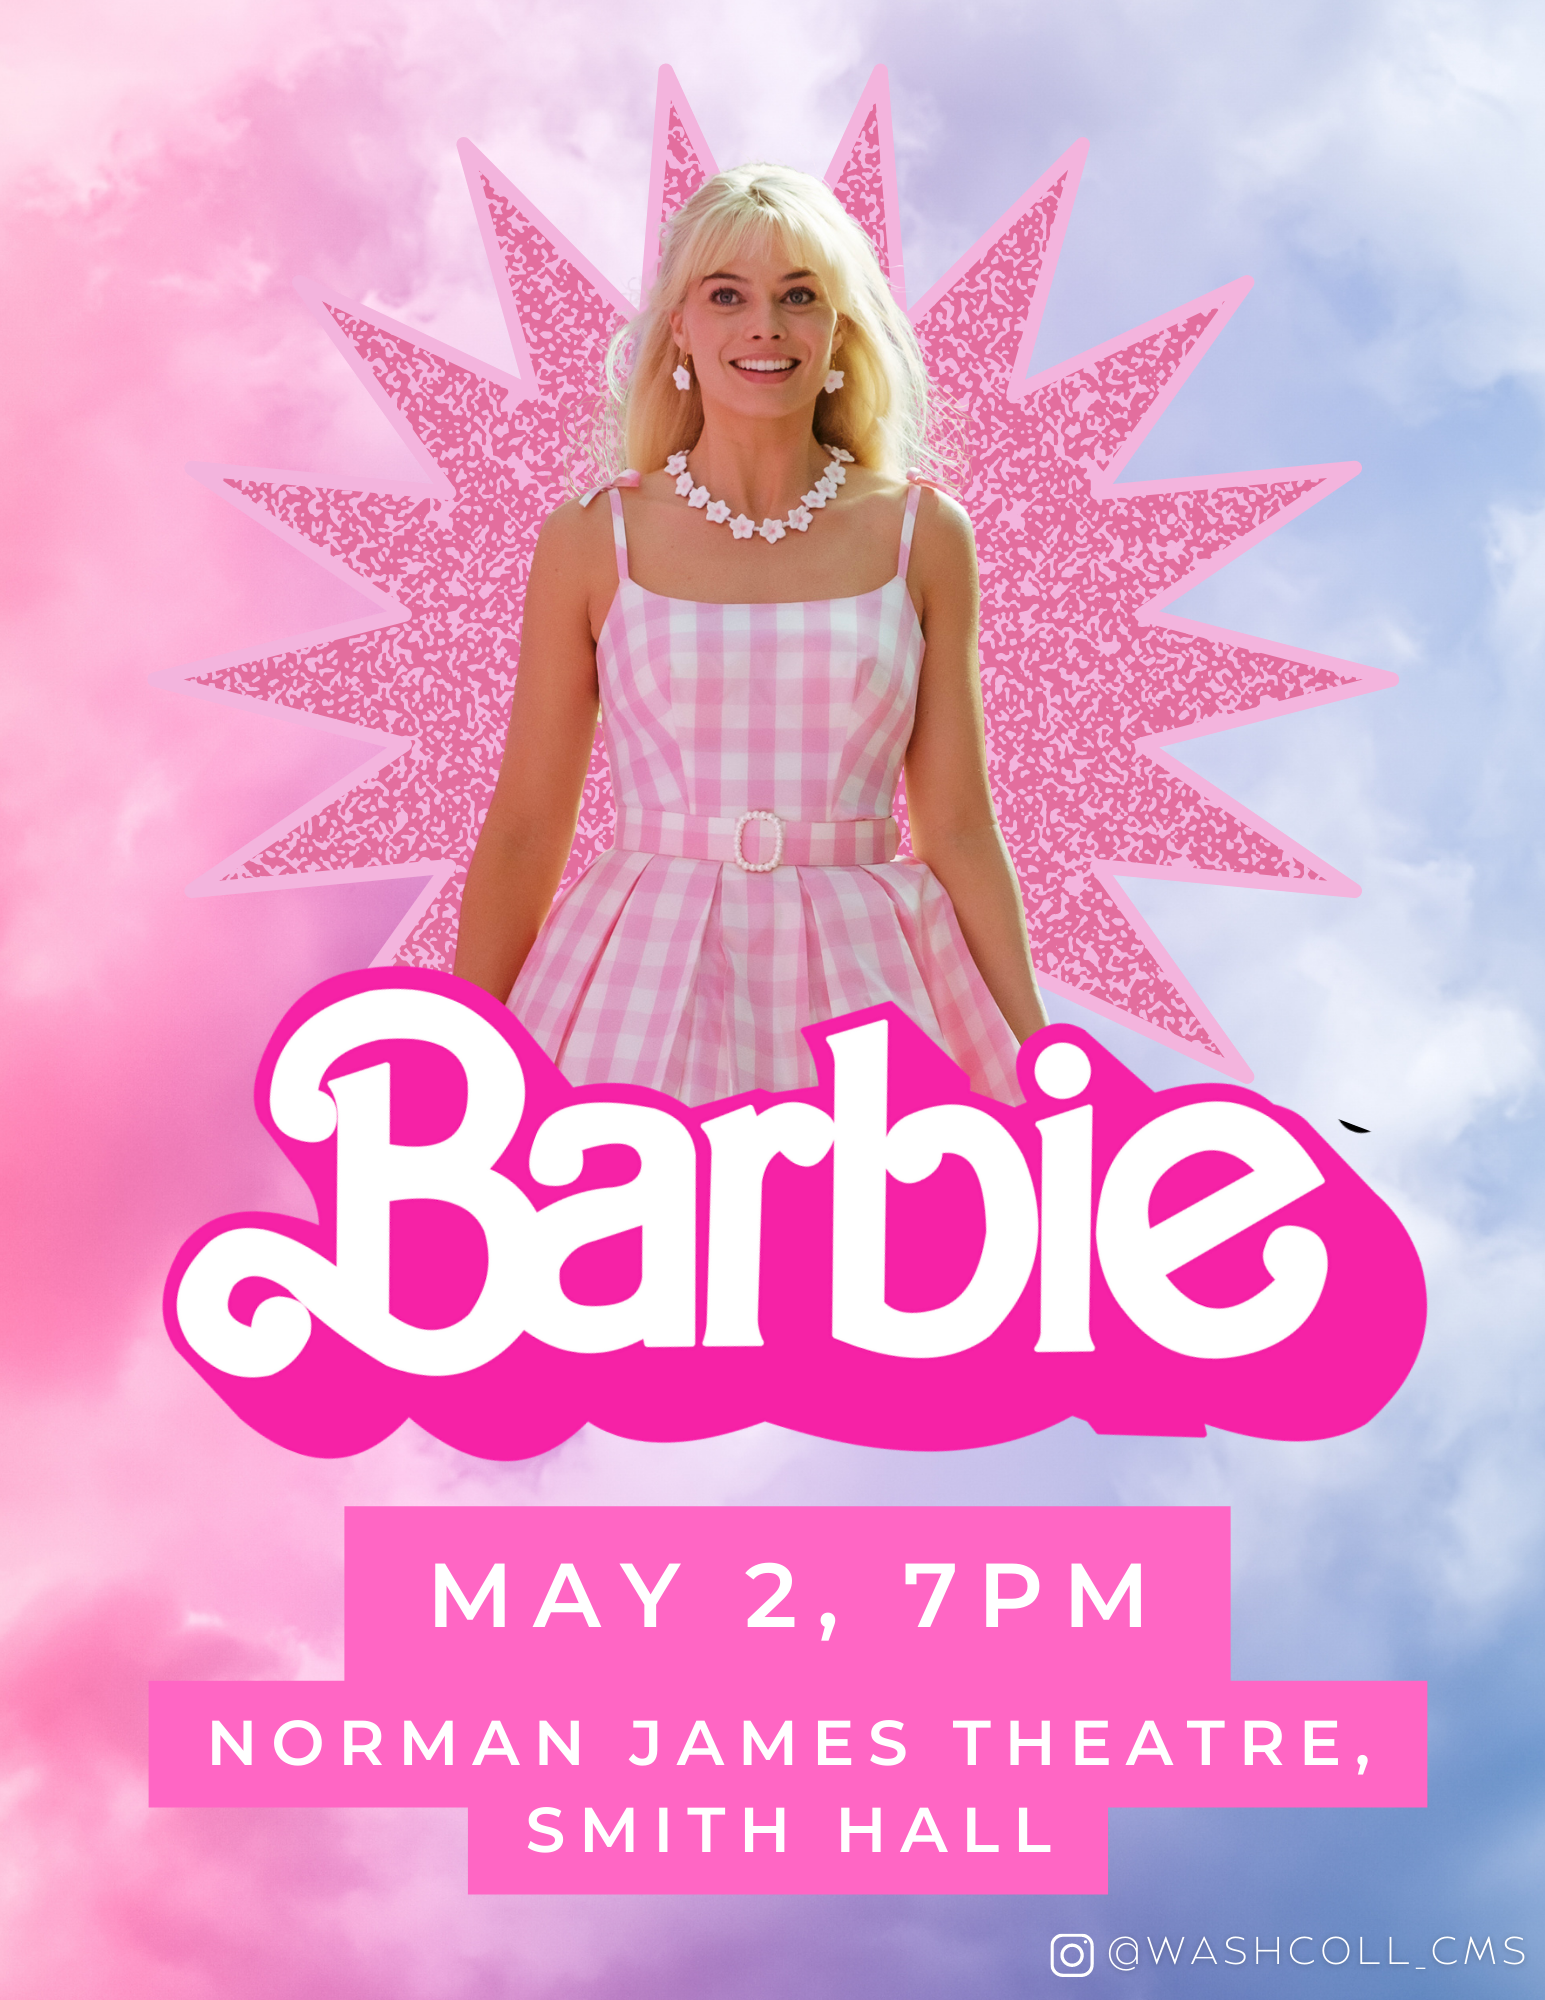  Movie poster for the film Barbie